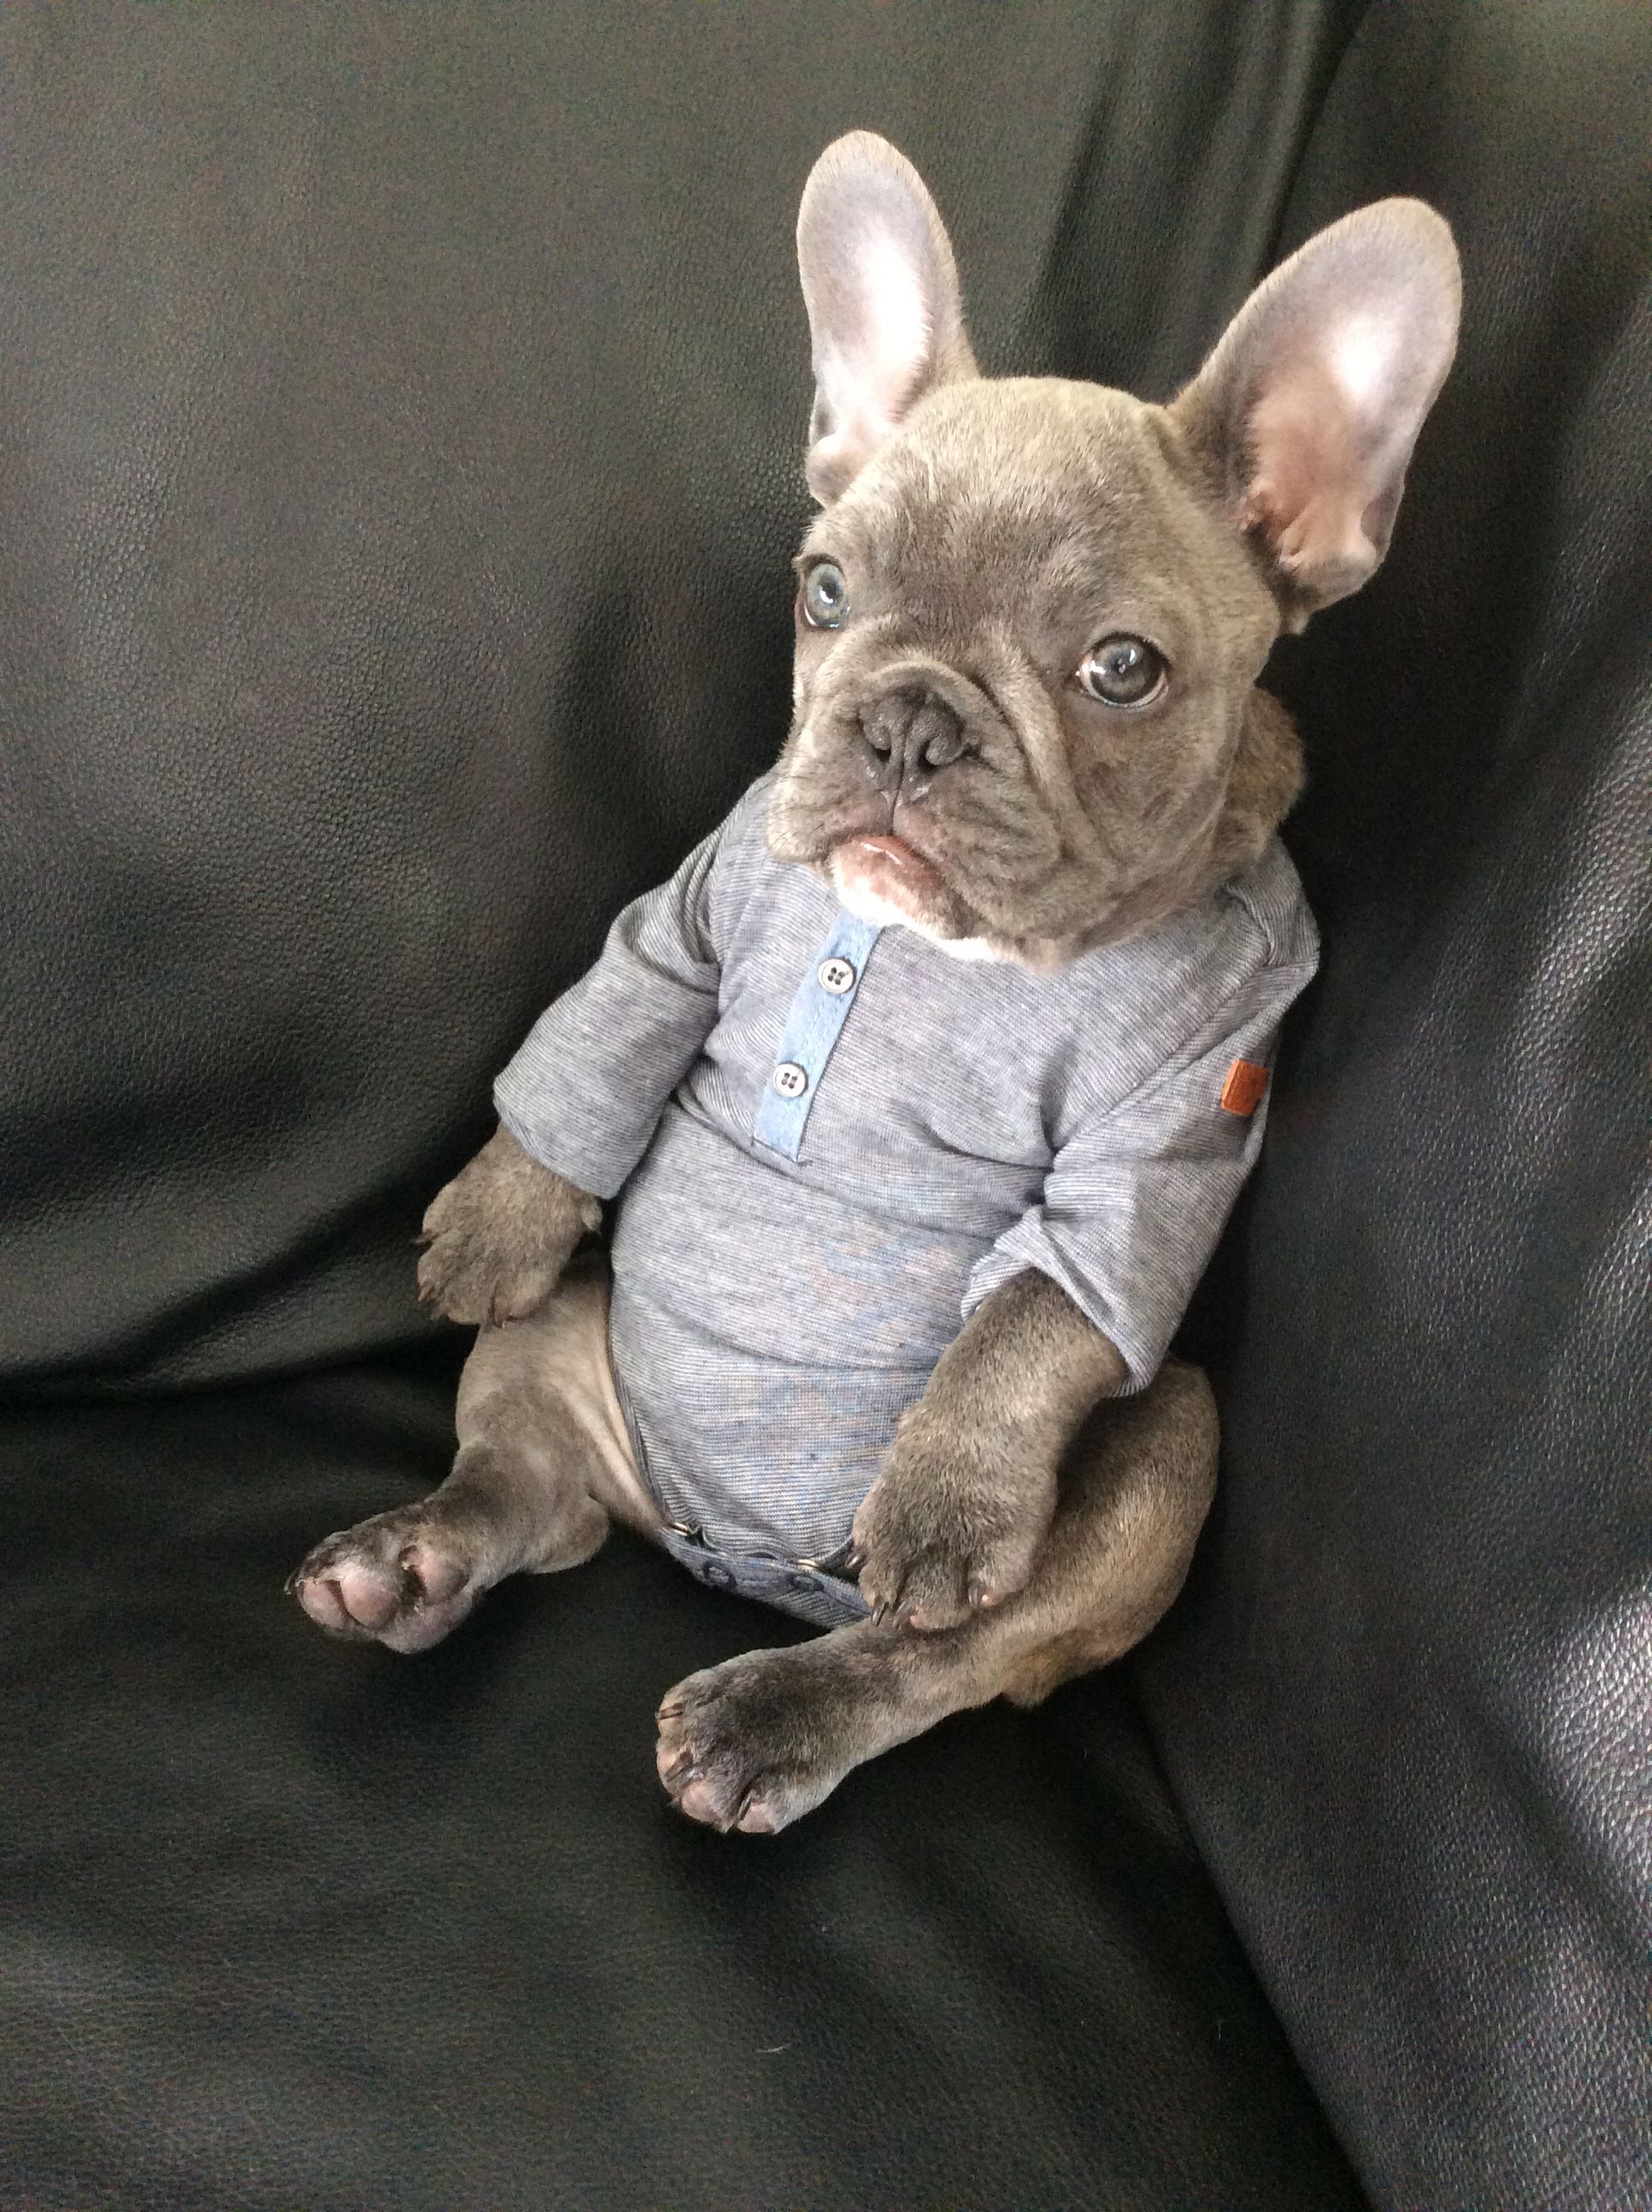 Bulldog - Calm Courageous and Friendly | French bulldogs, Onesie and ...